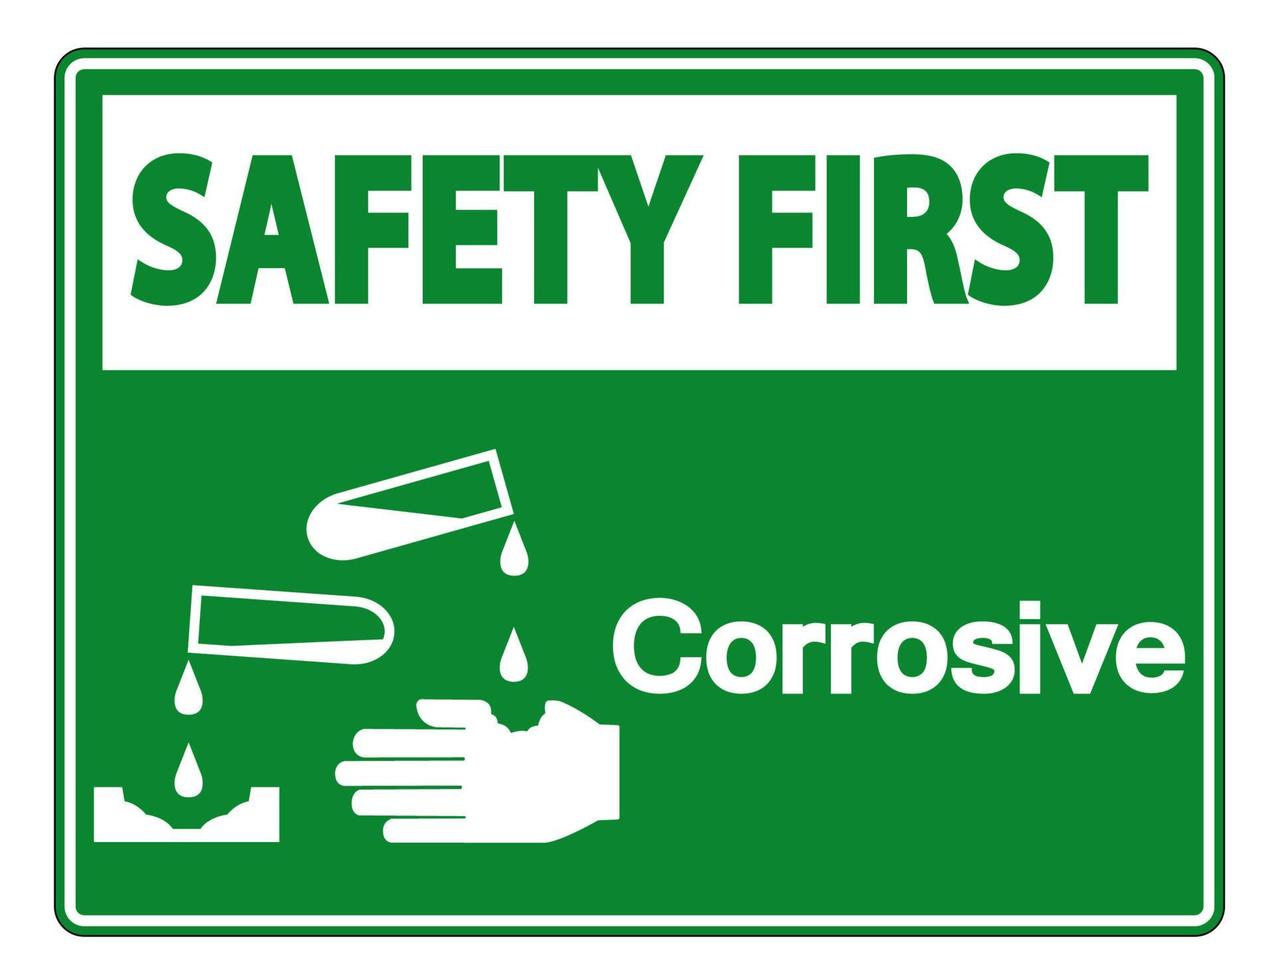 Safety first Corrosive Symbol Sign on white background vector